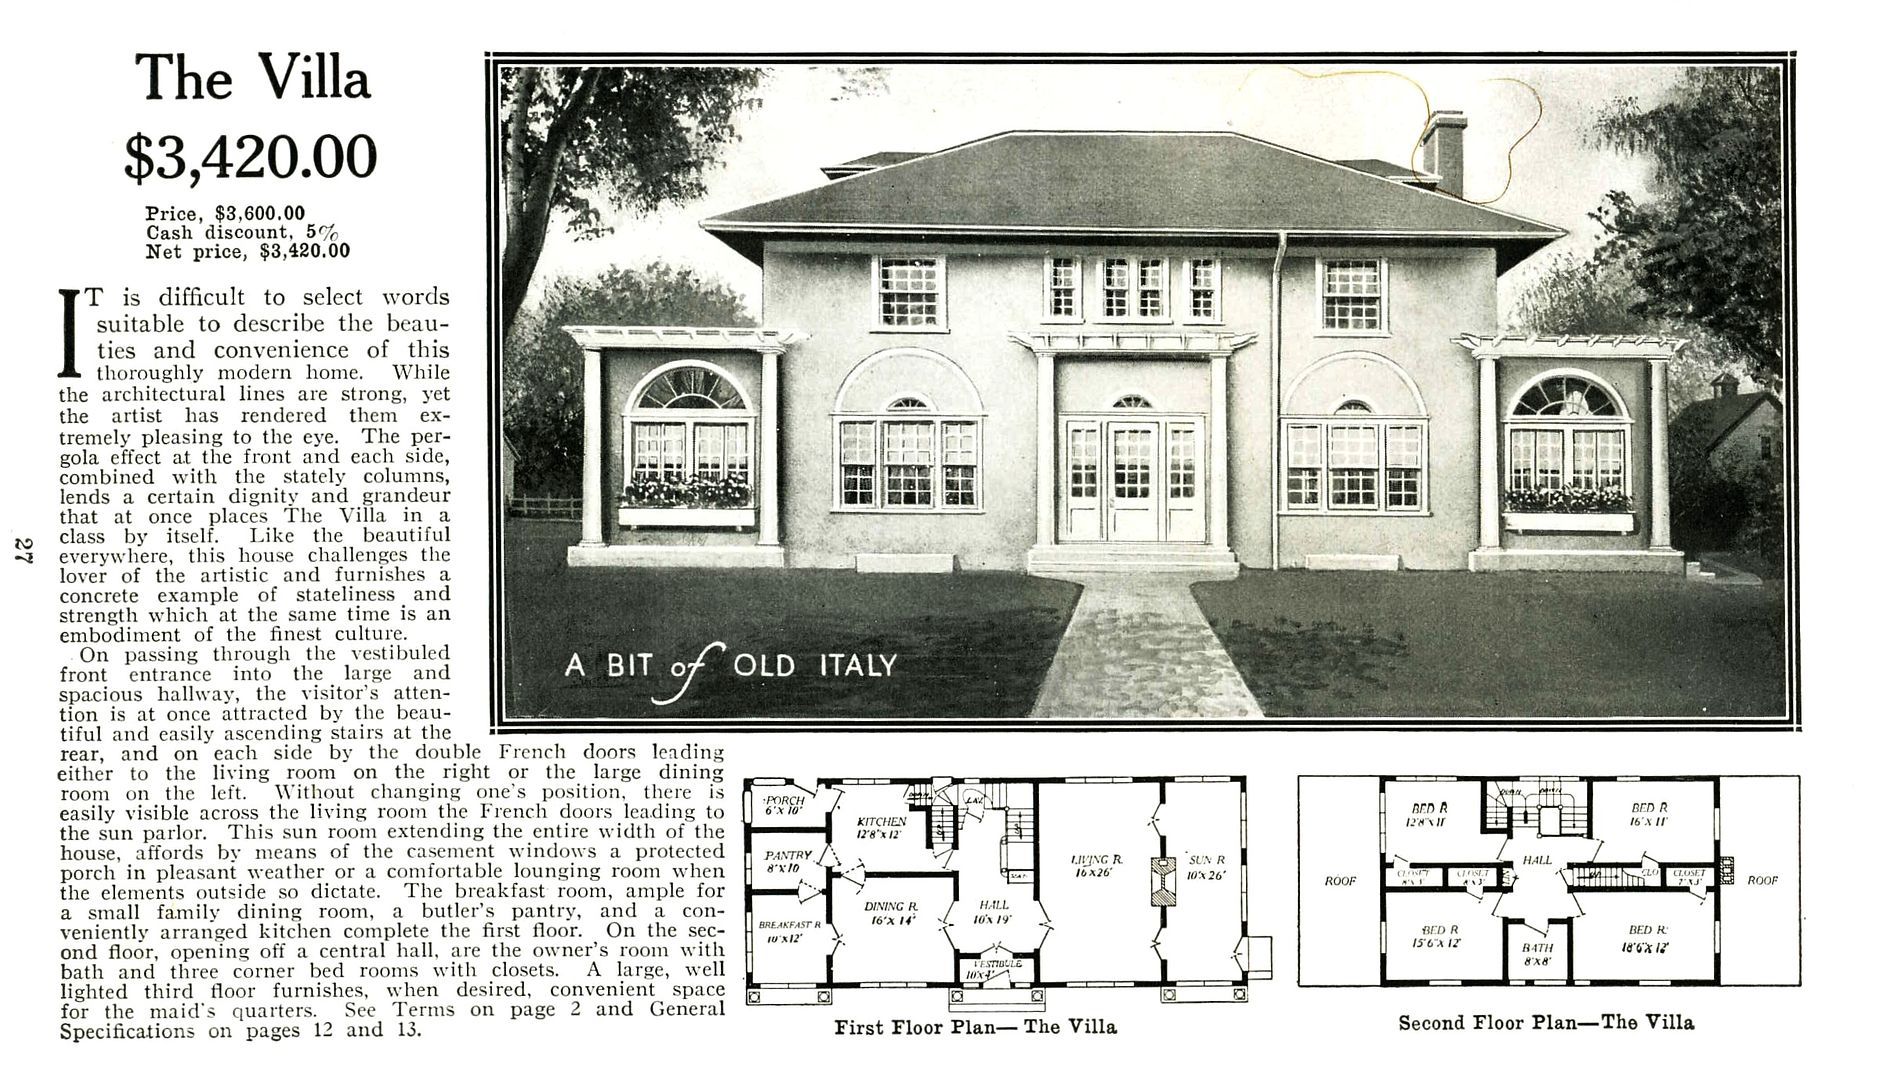 The Villa was first offered in the 1916 Aladdin catalog. 